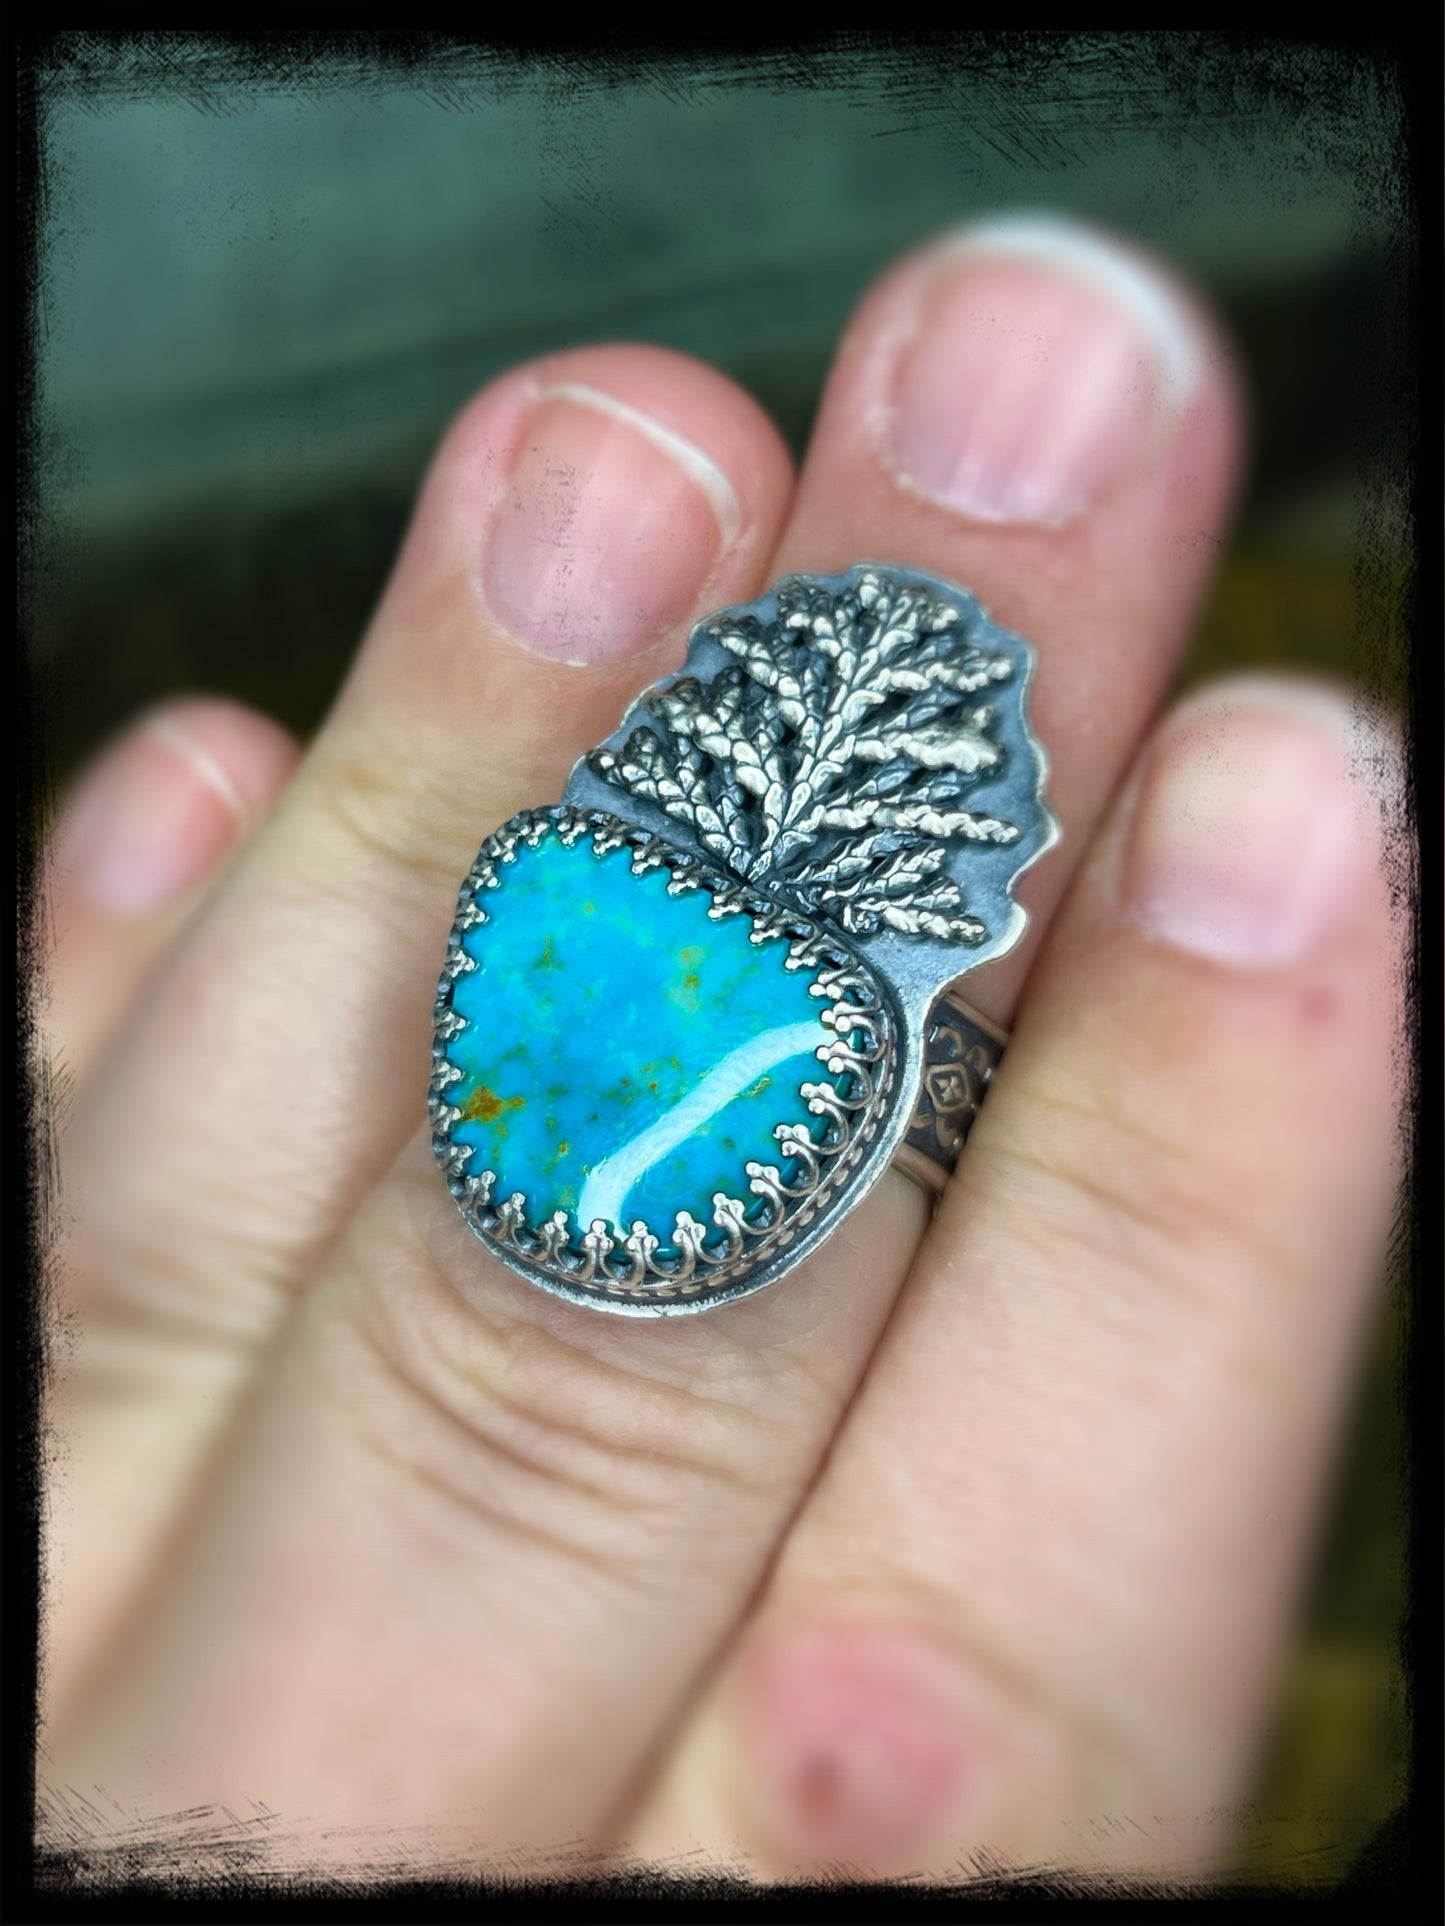 Turquoise Evergreen Ring-One of a Kind-Size 9